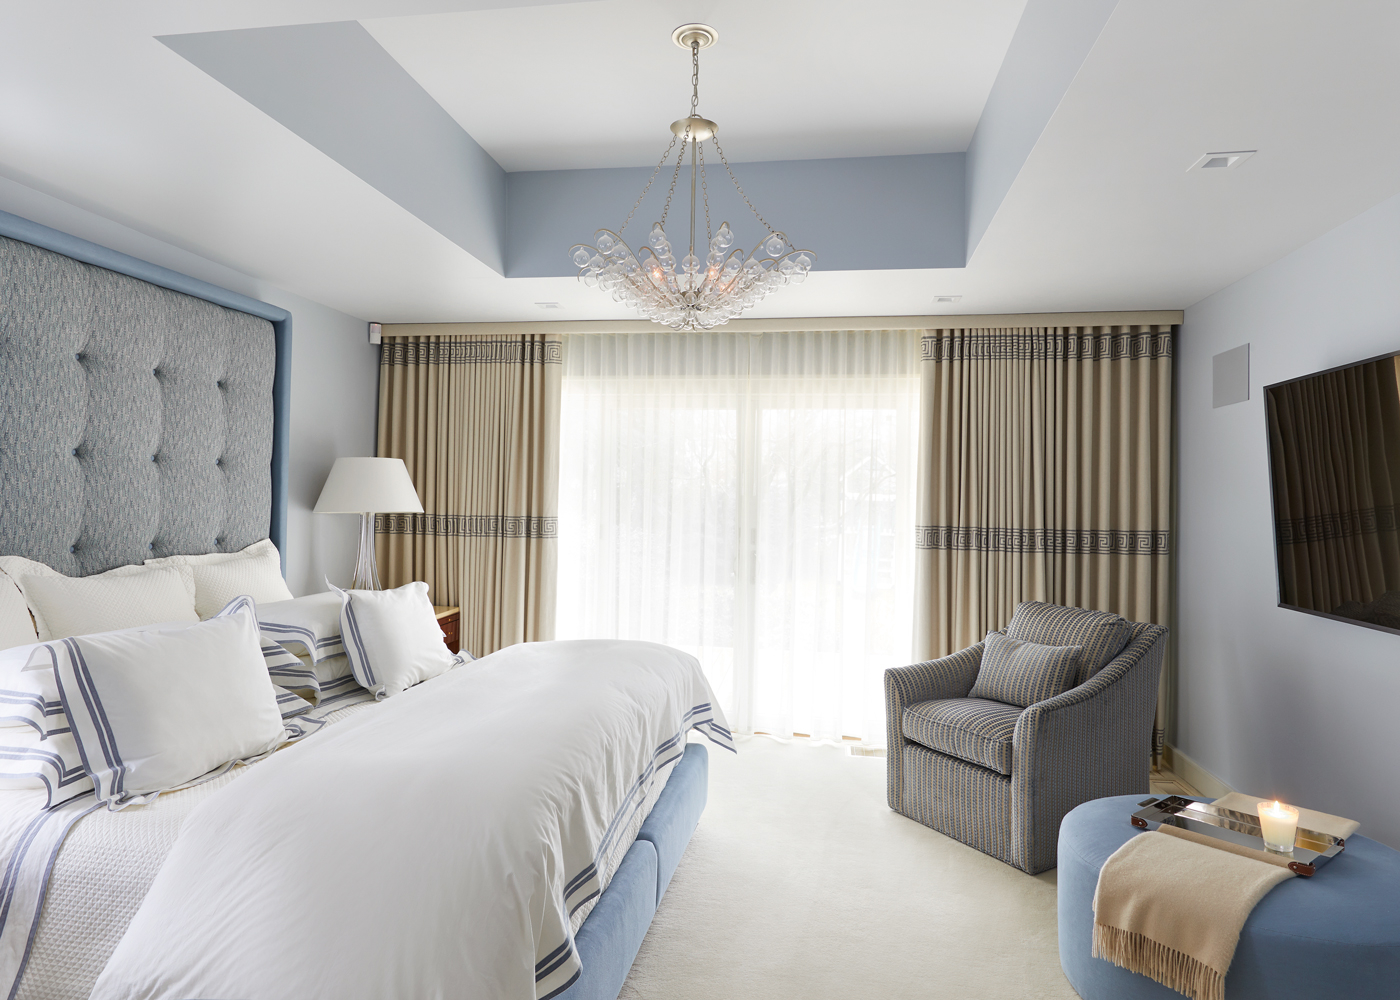 Bedroom interiors designed by Annette Jaffe Interiors in Roslyn